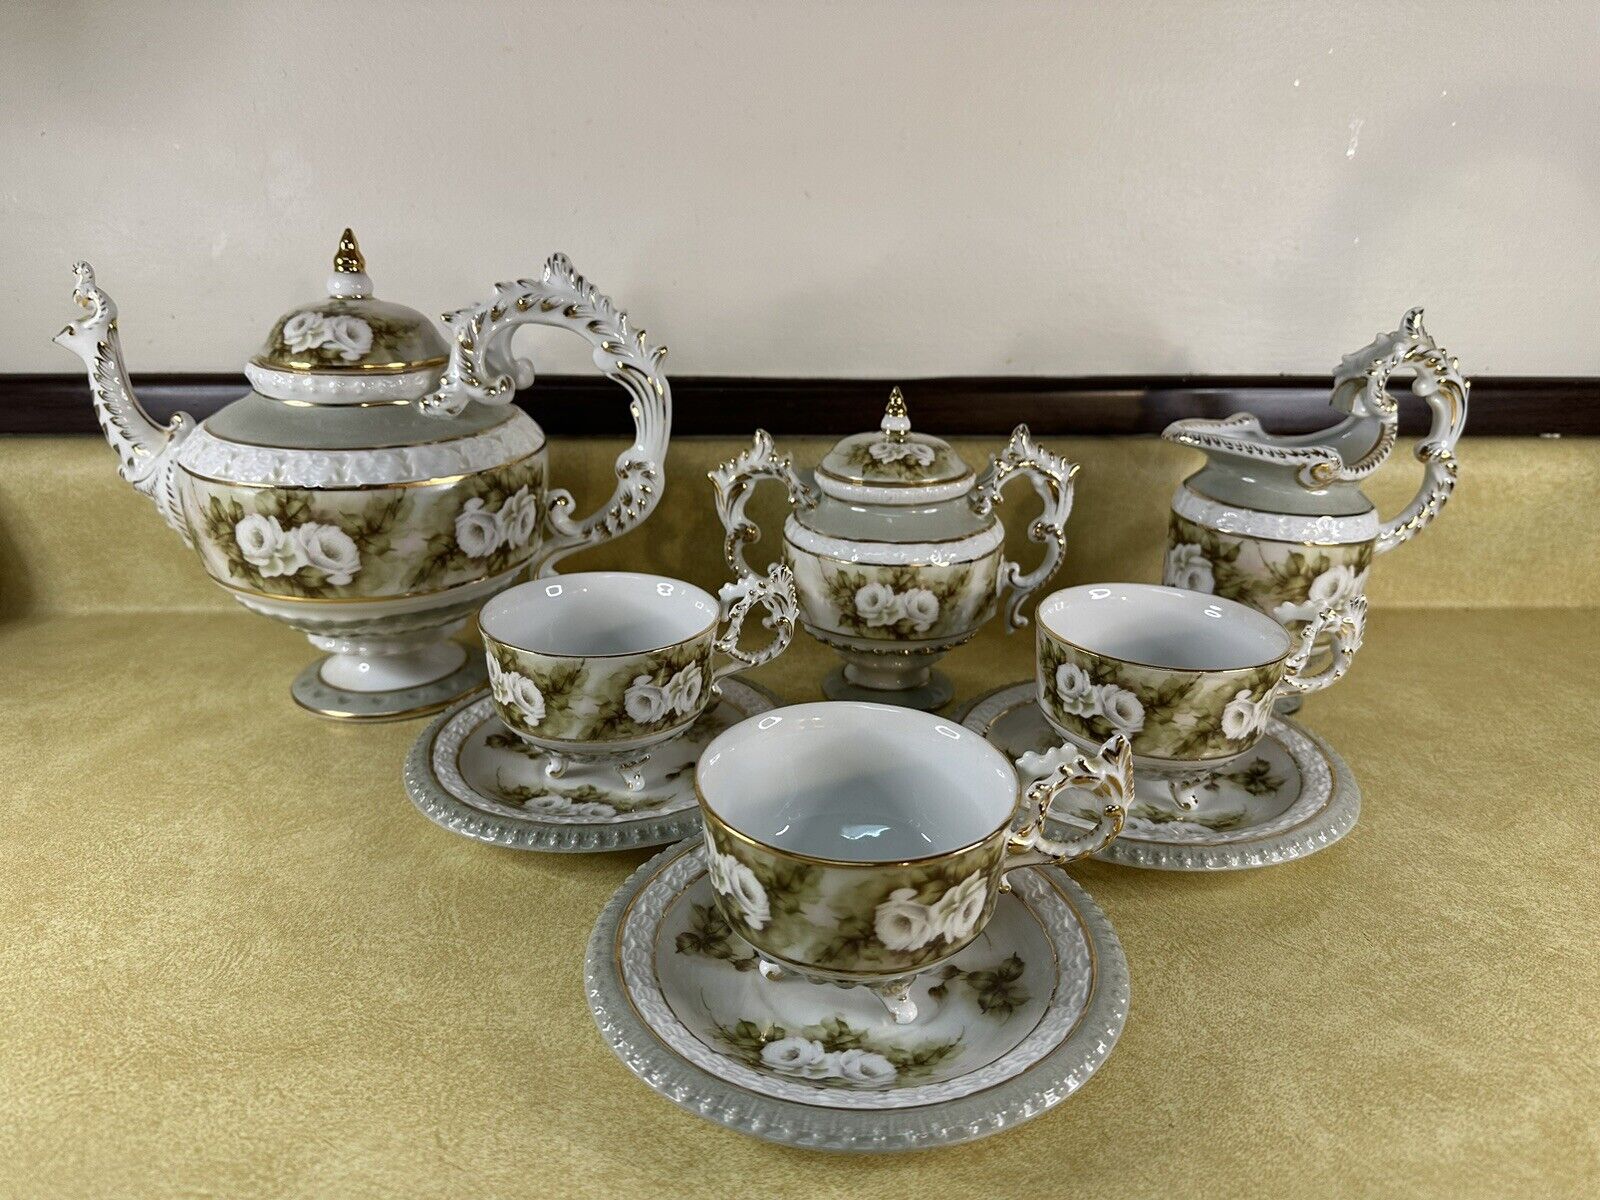 Complete Tea Set. Roses on Sage Green & White w/Gold Accents, Footed, Victorian